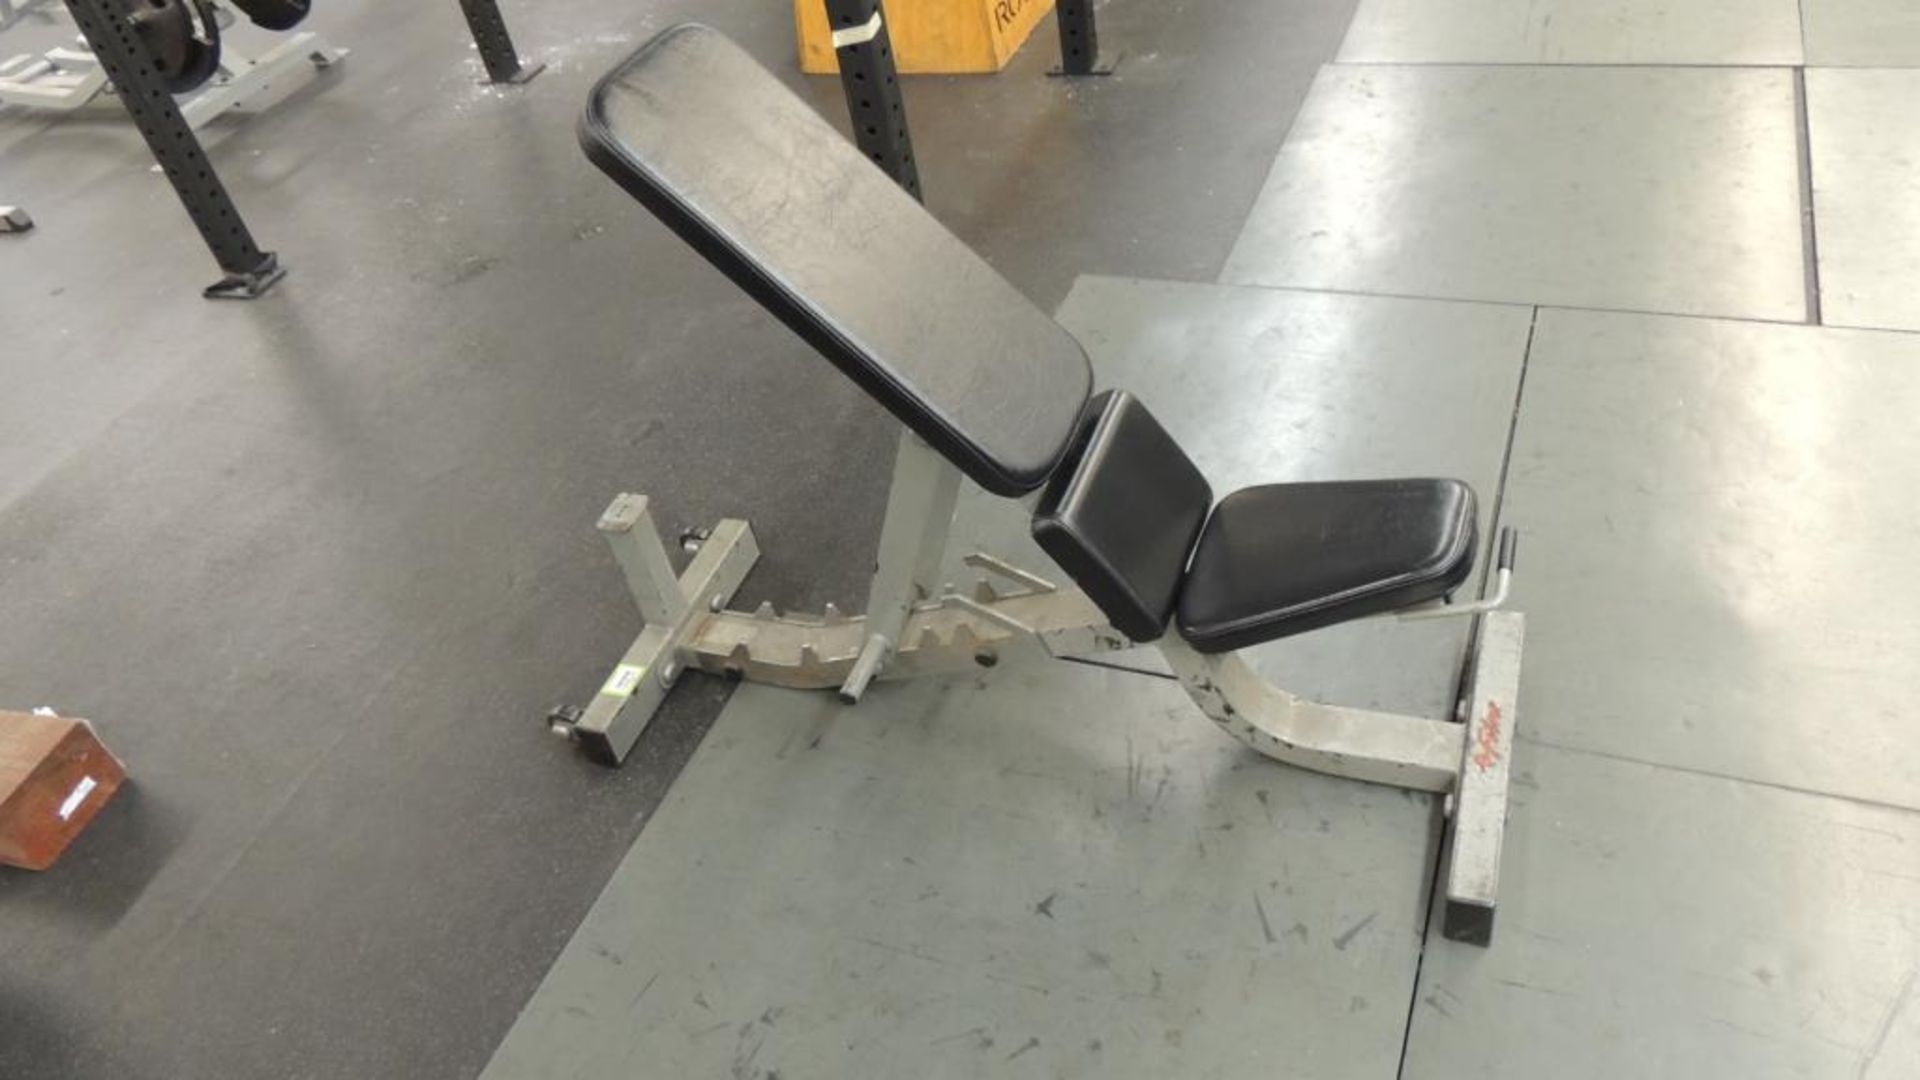 Adjustable Exercise Bench - Image 3 of 3